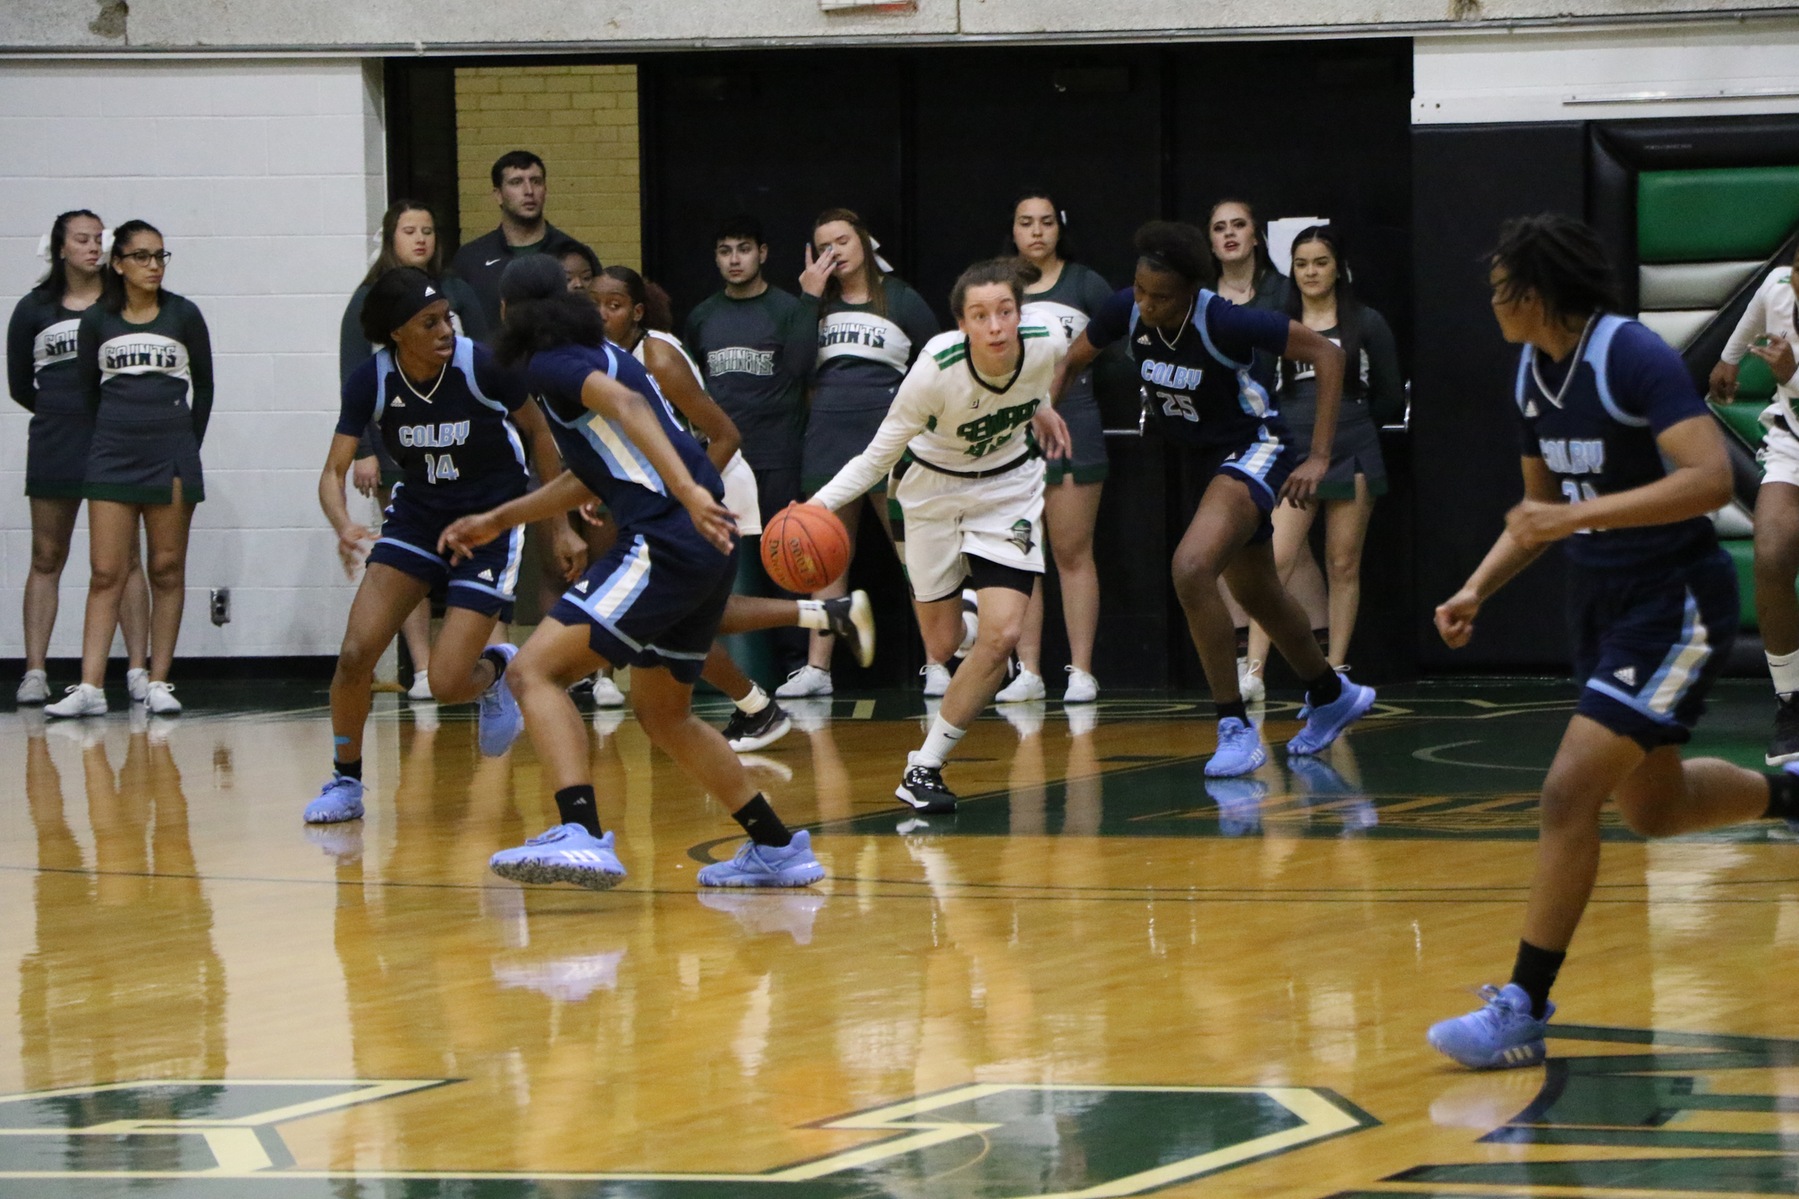 No. 12 Lady Saints claim 60th win in a row in the Greenhouse